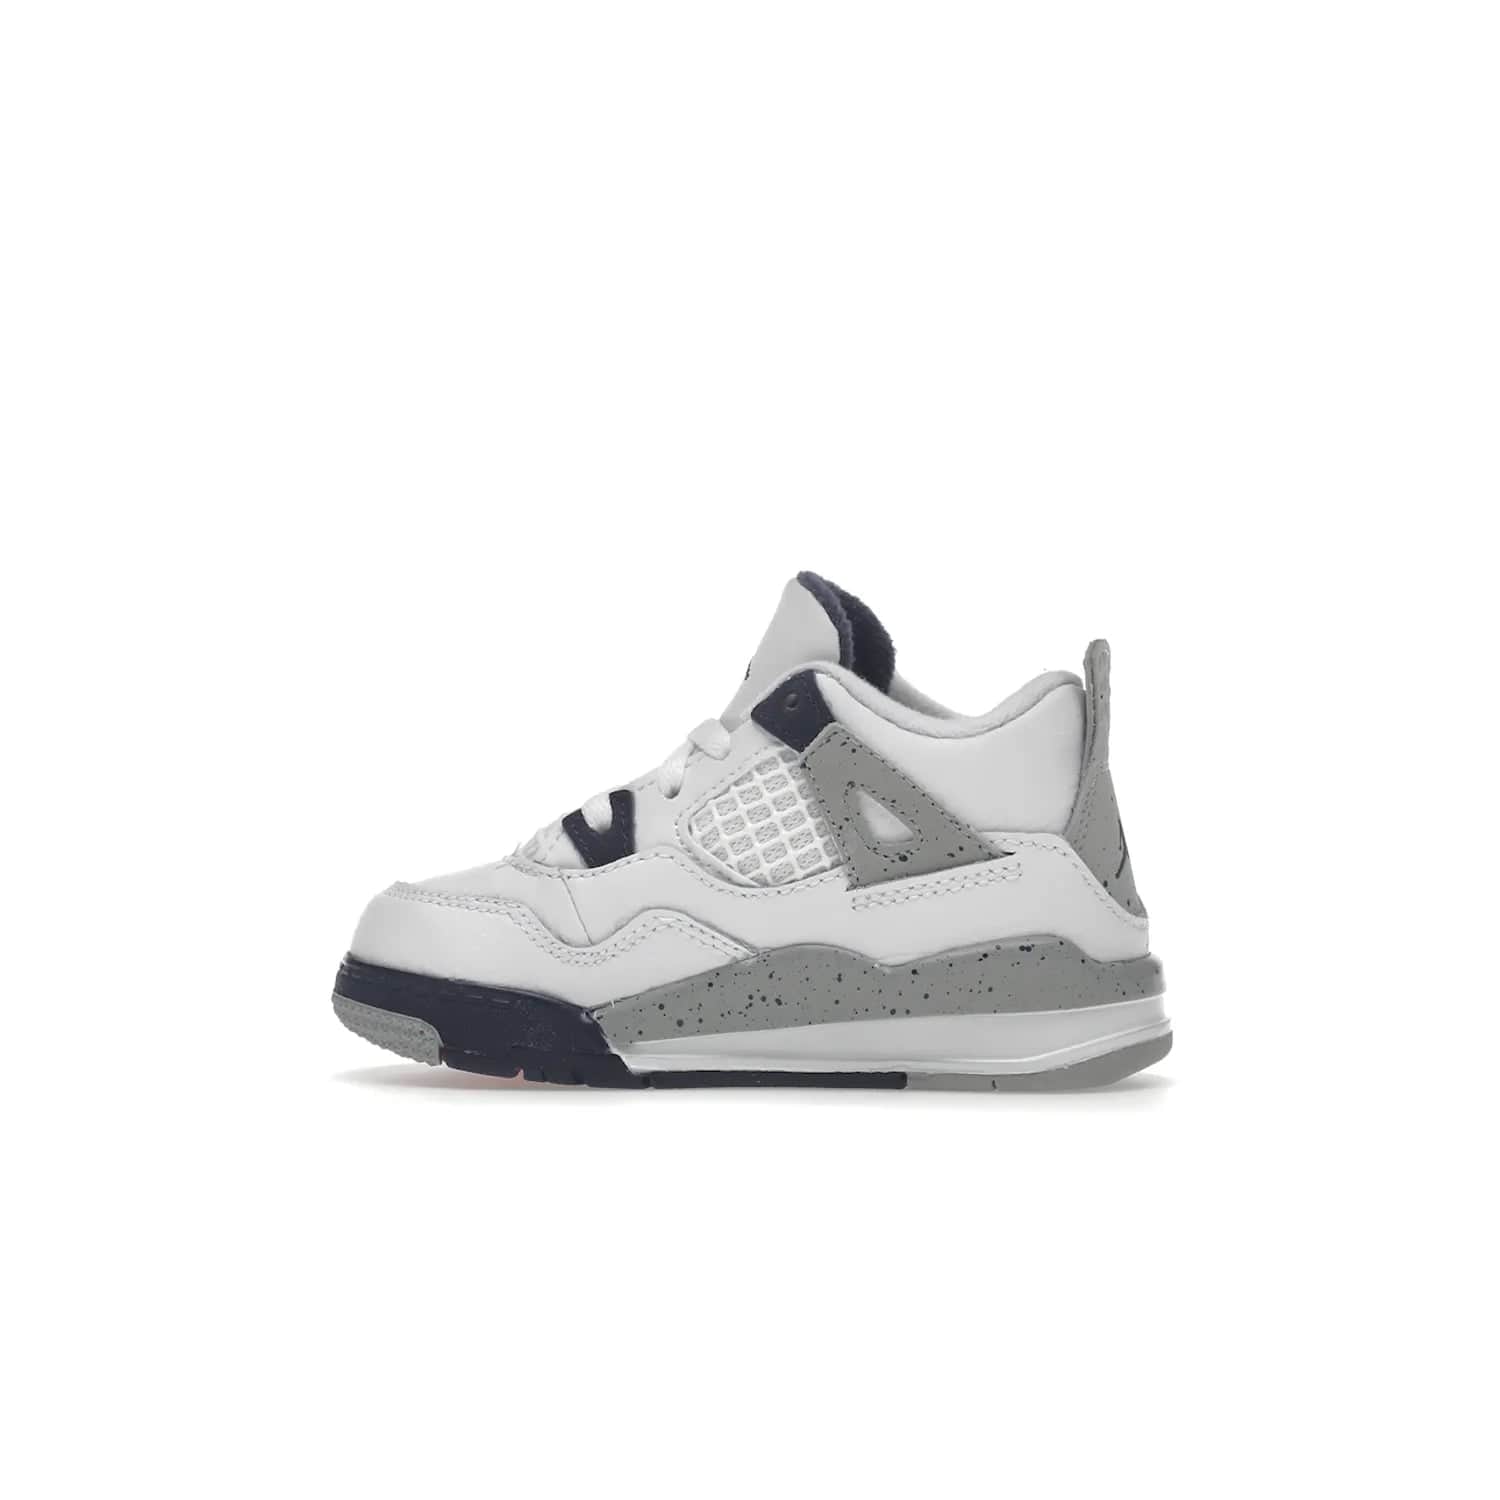 Jordan 4 Retro Midnight Navy (TD) - Image 20 - Only at www.BallersClubKickz.com - Introducing the Jordan 4 Retro Midnight Navy (TD) for kids. White leather upper with navy and grey accents plus fire red detailing. Perfect for everyday wear. Get yours before they sell out.